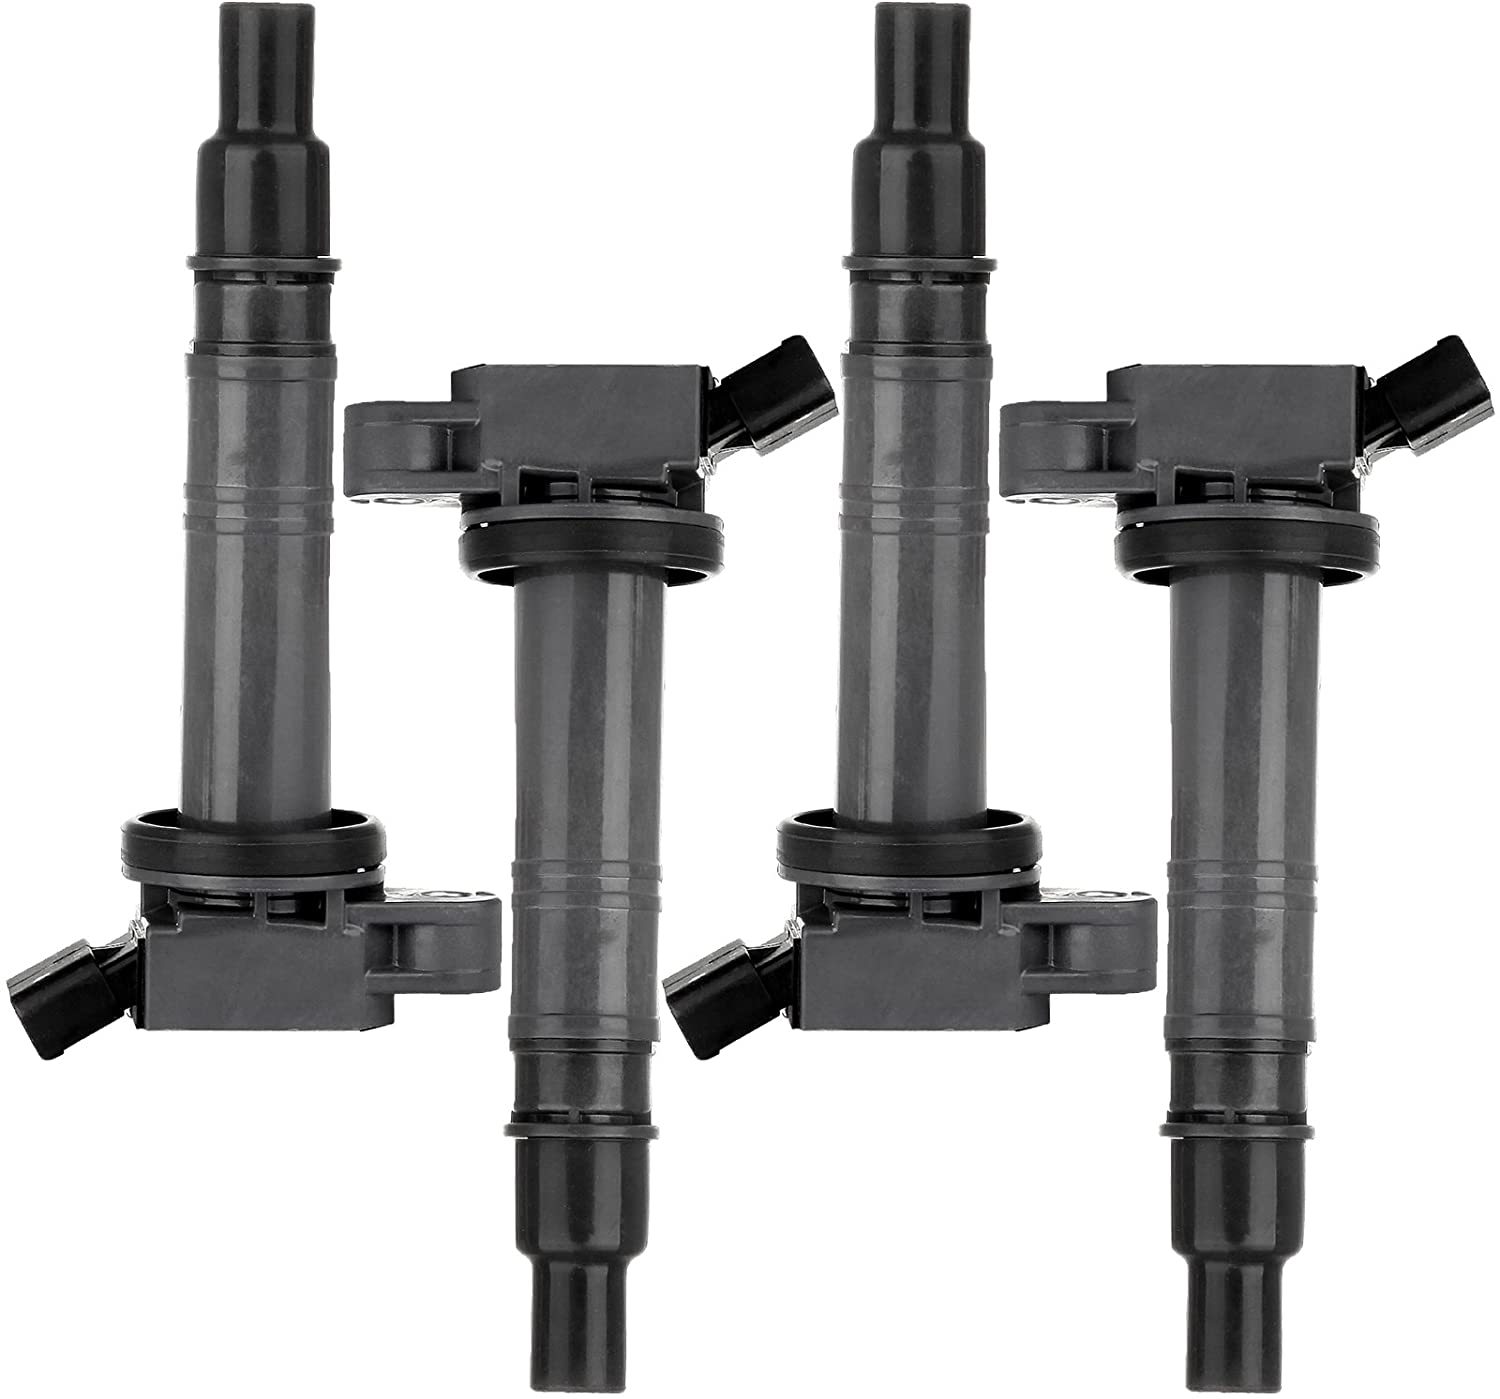 SCITOO 100% New 4pcs Ignition Coil Set Compatible with Scio-n/Lexu-s/Toyot-a 2003-2010 Automobiles Fit for OE: UF495 5C1419